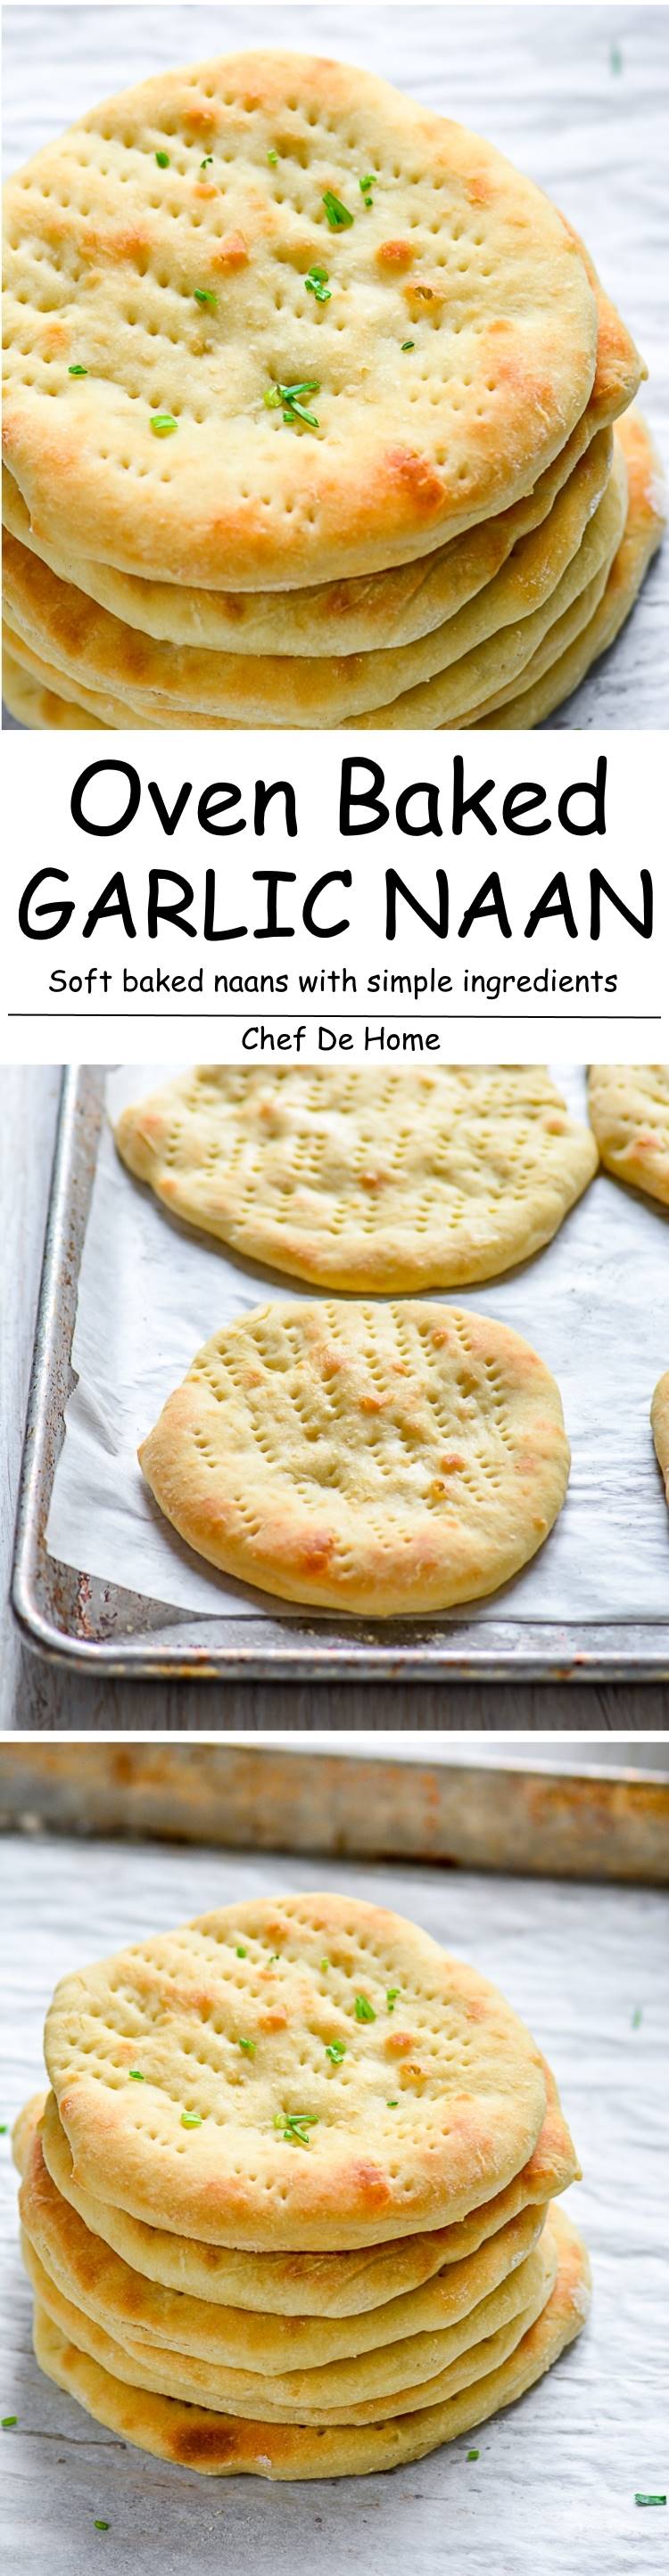 Oven Baked quick and Easy Naan Bread at home | chefdehome.com